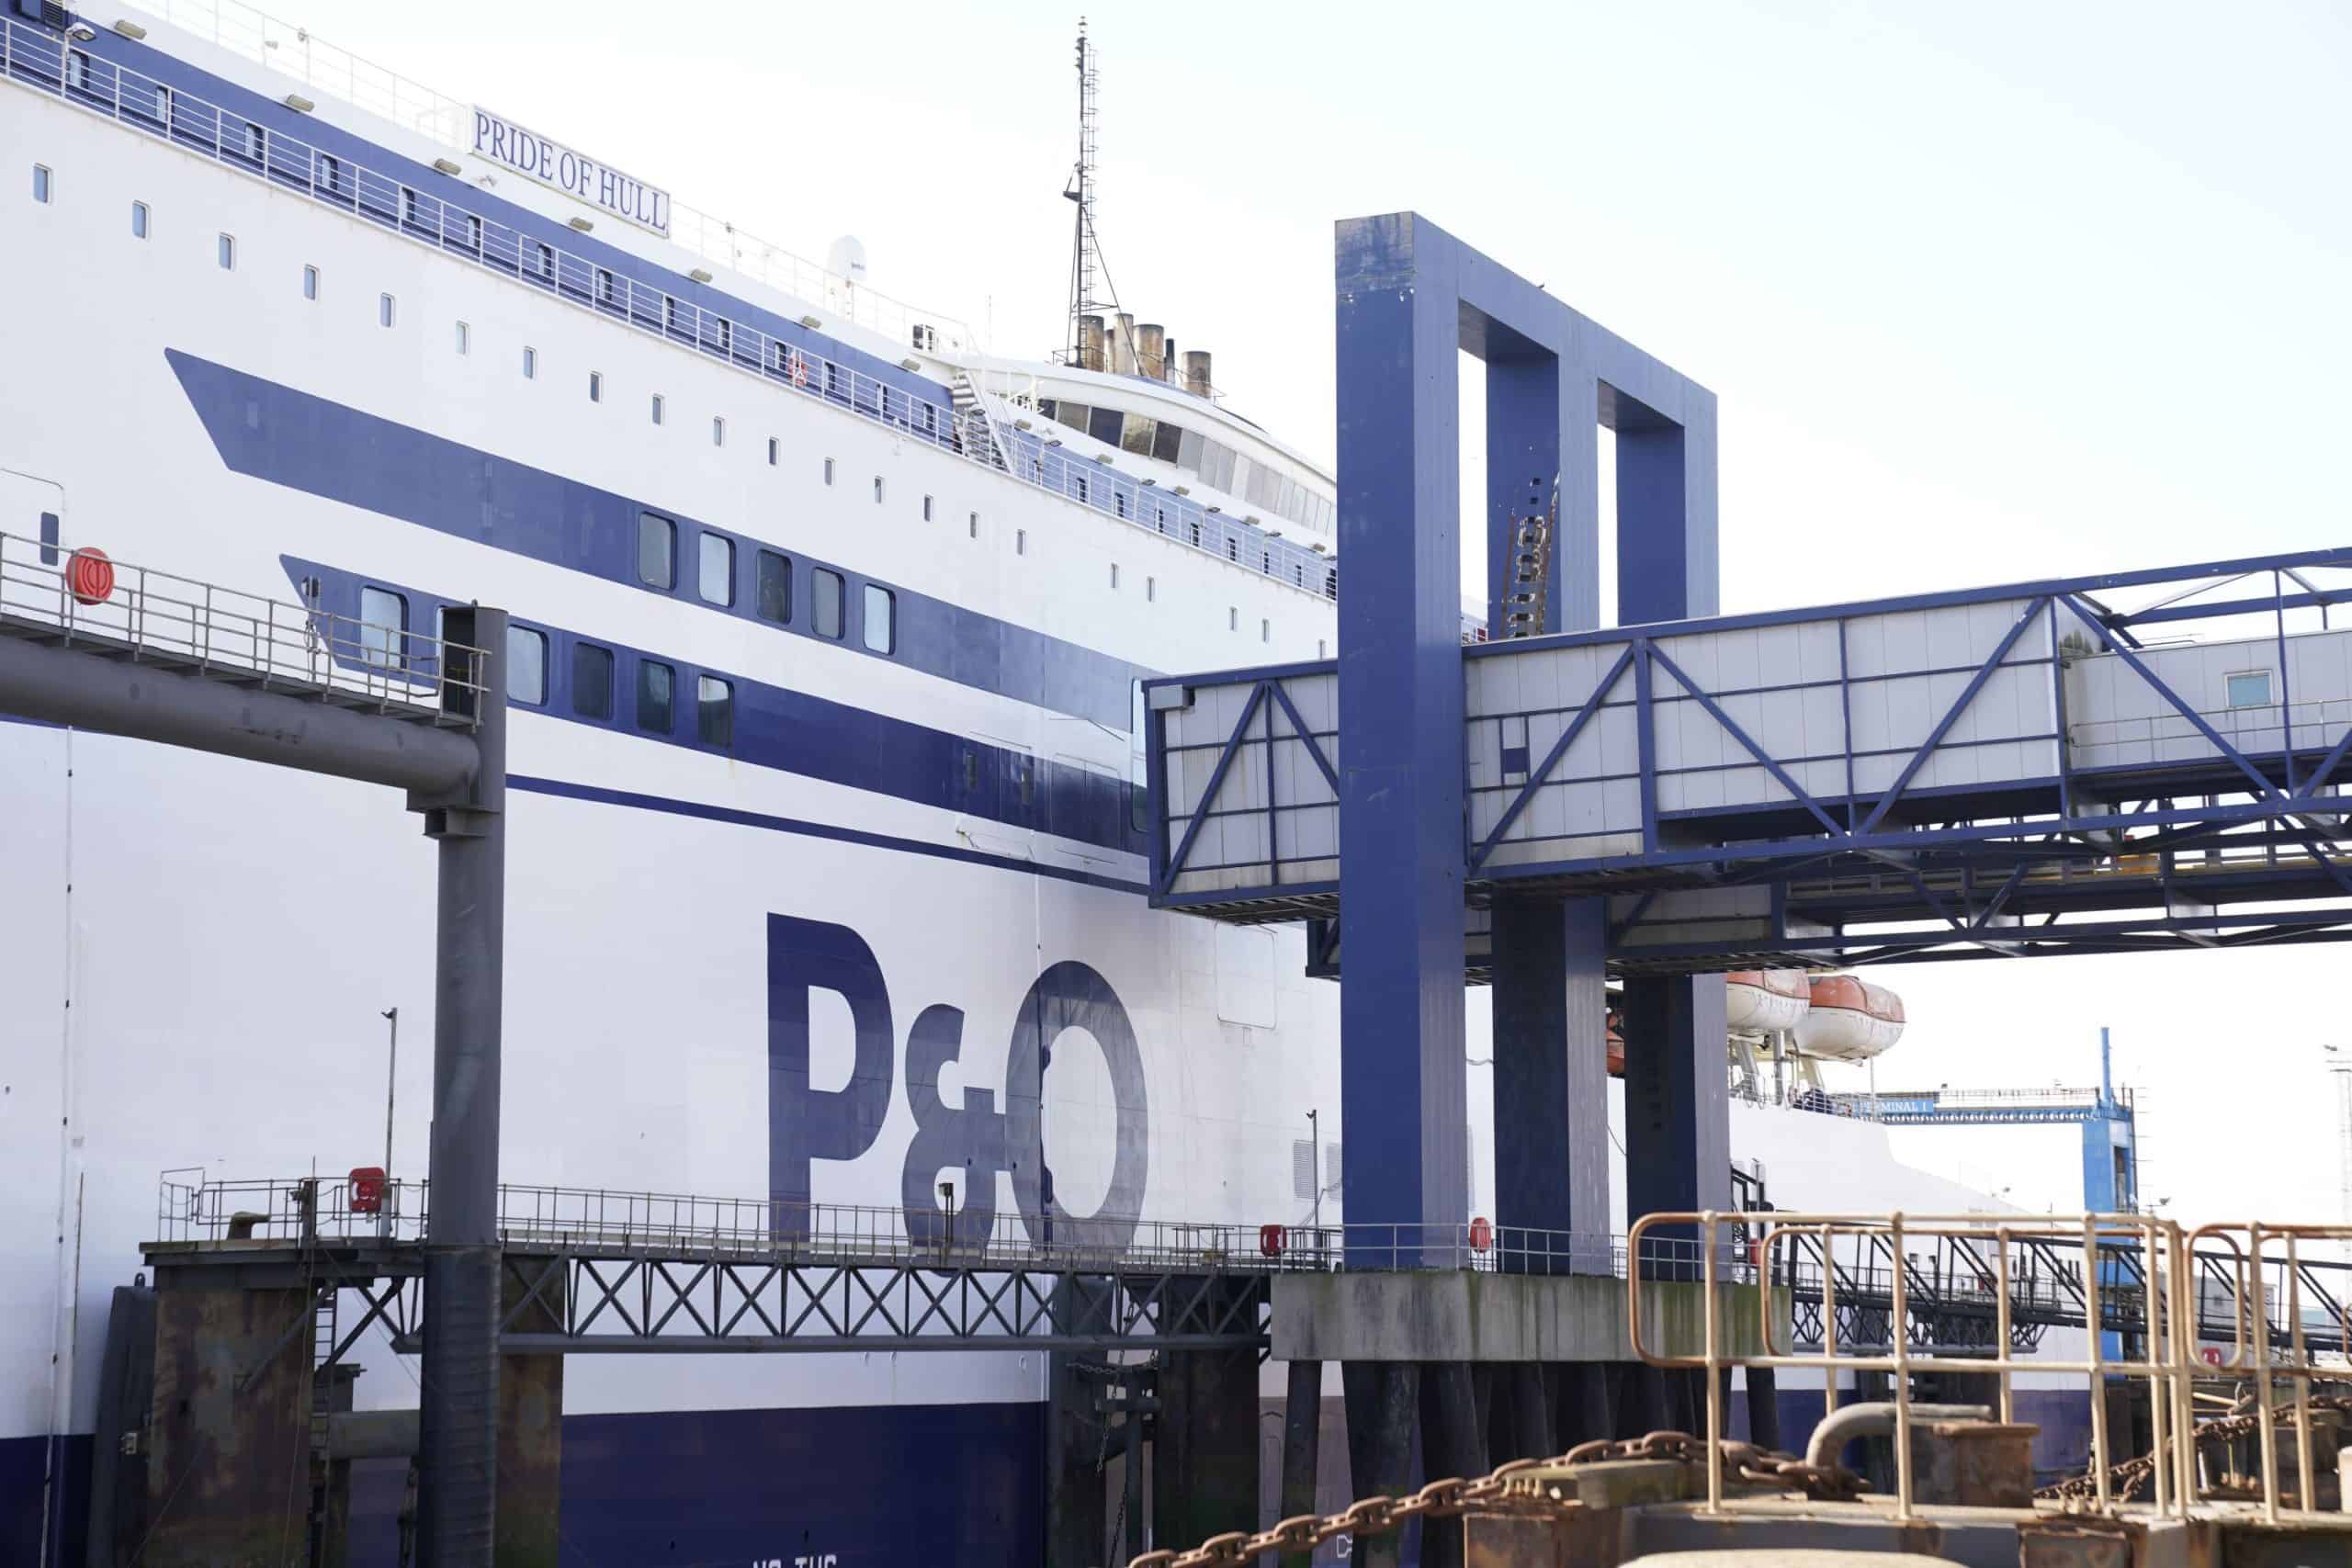 Watch: The moment P&O Ferries told 800 staff they had lost their jobs